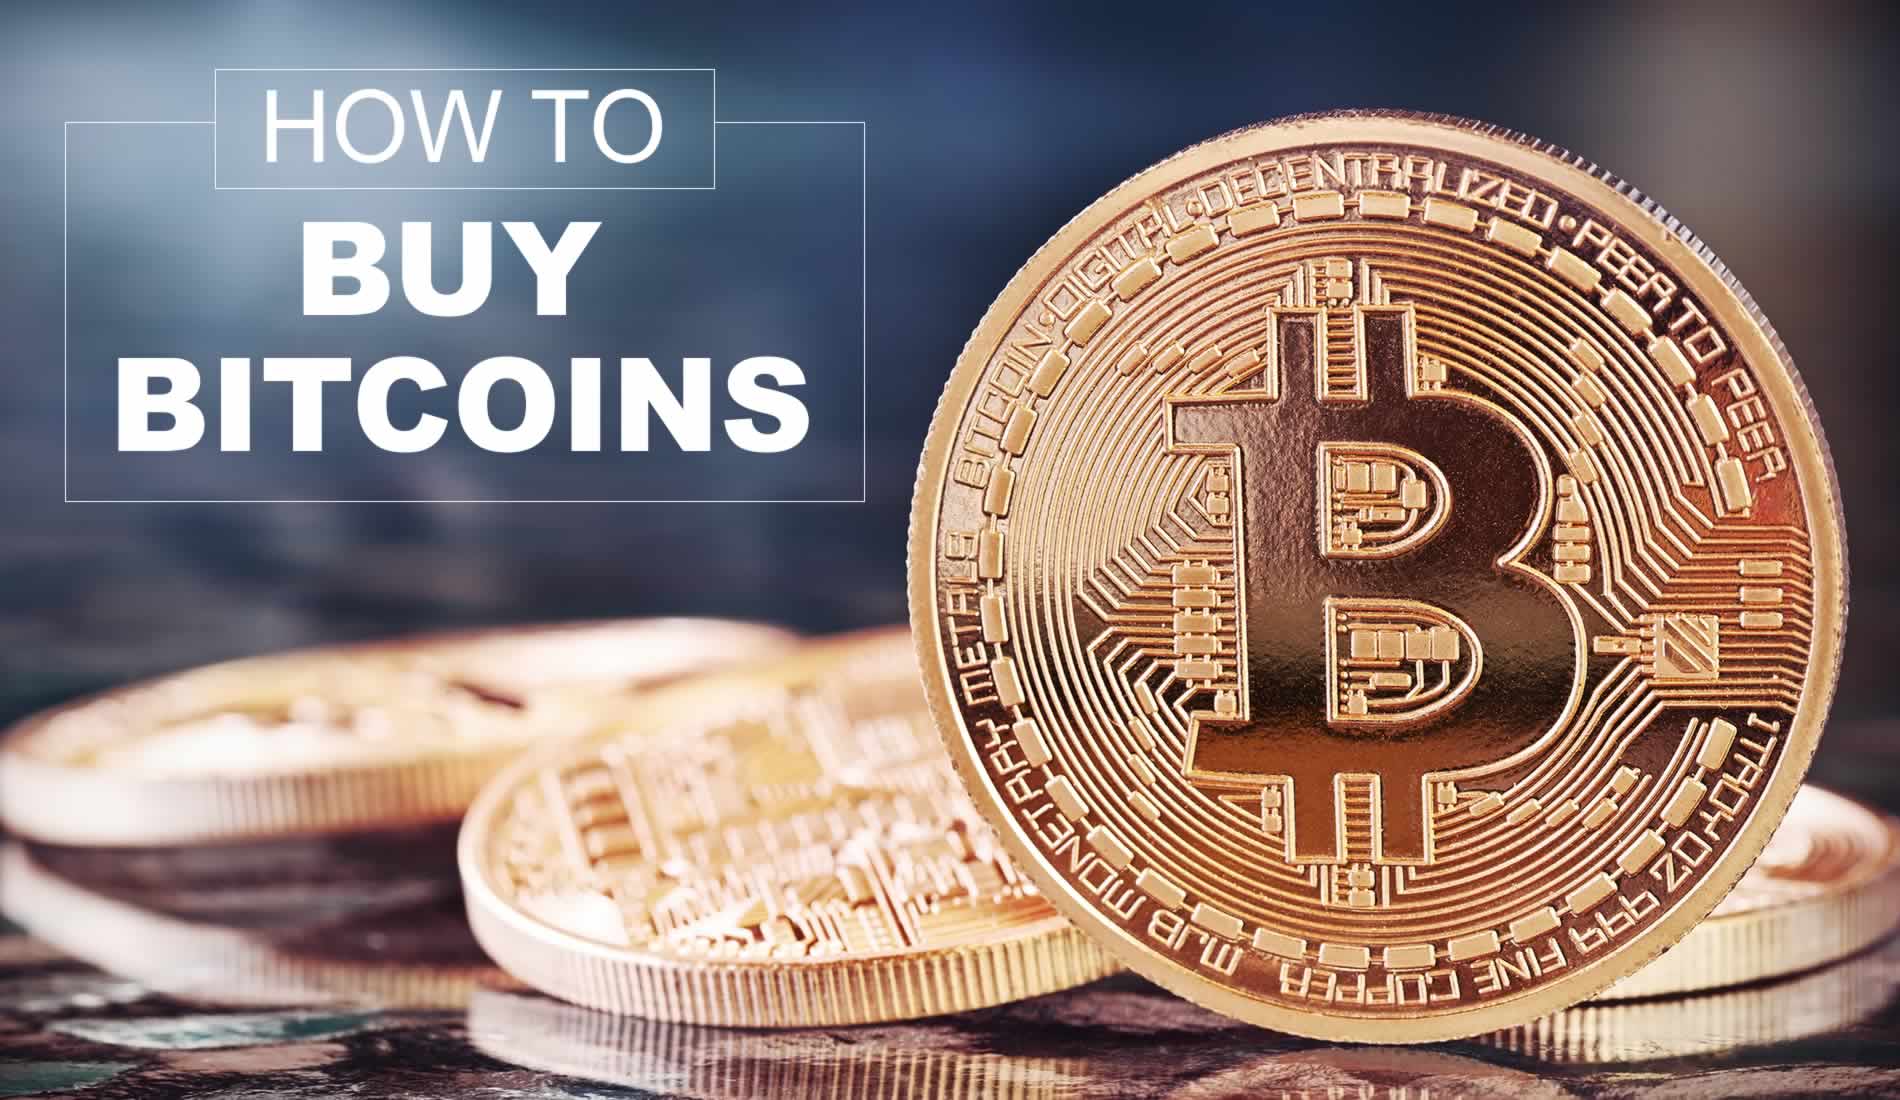 How can you buy bitcoin